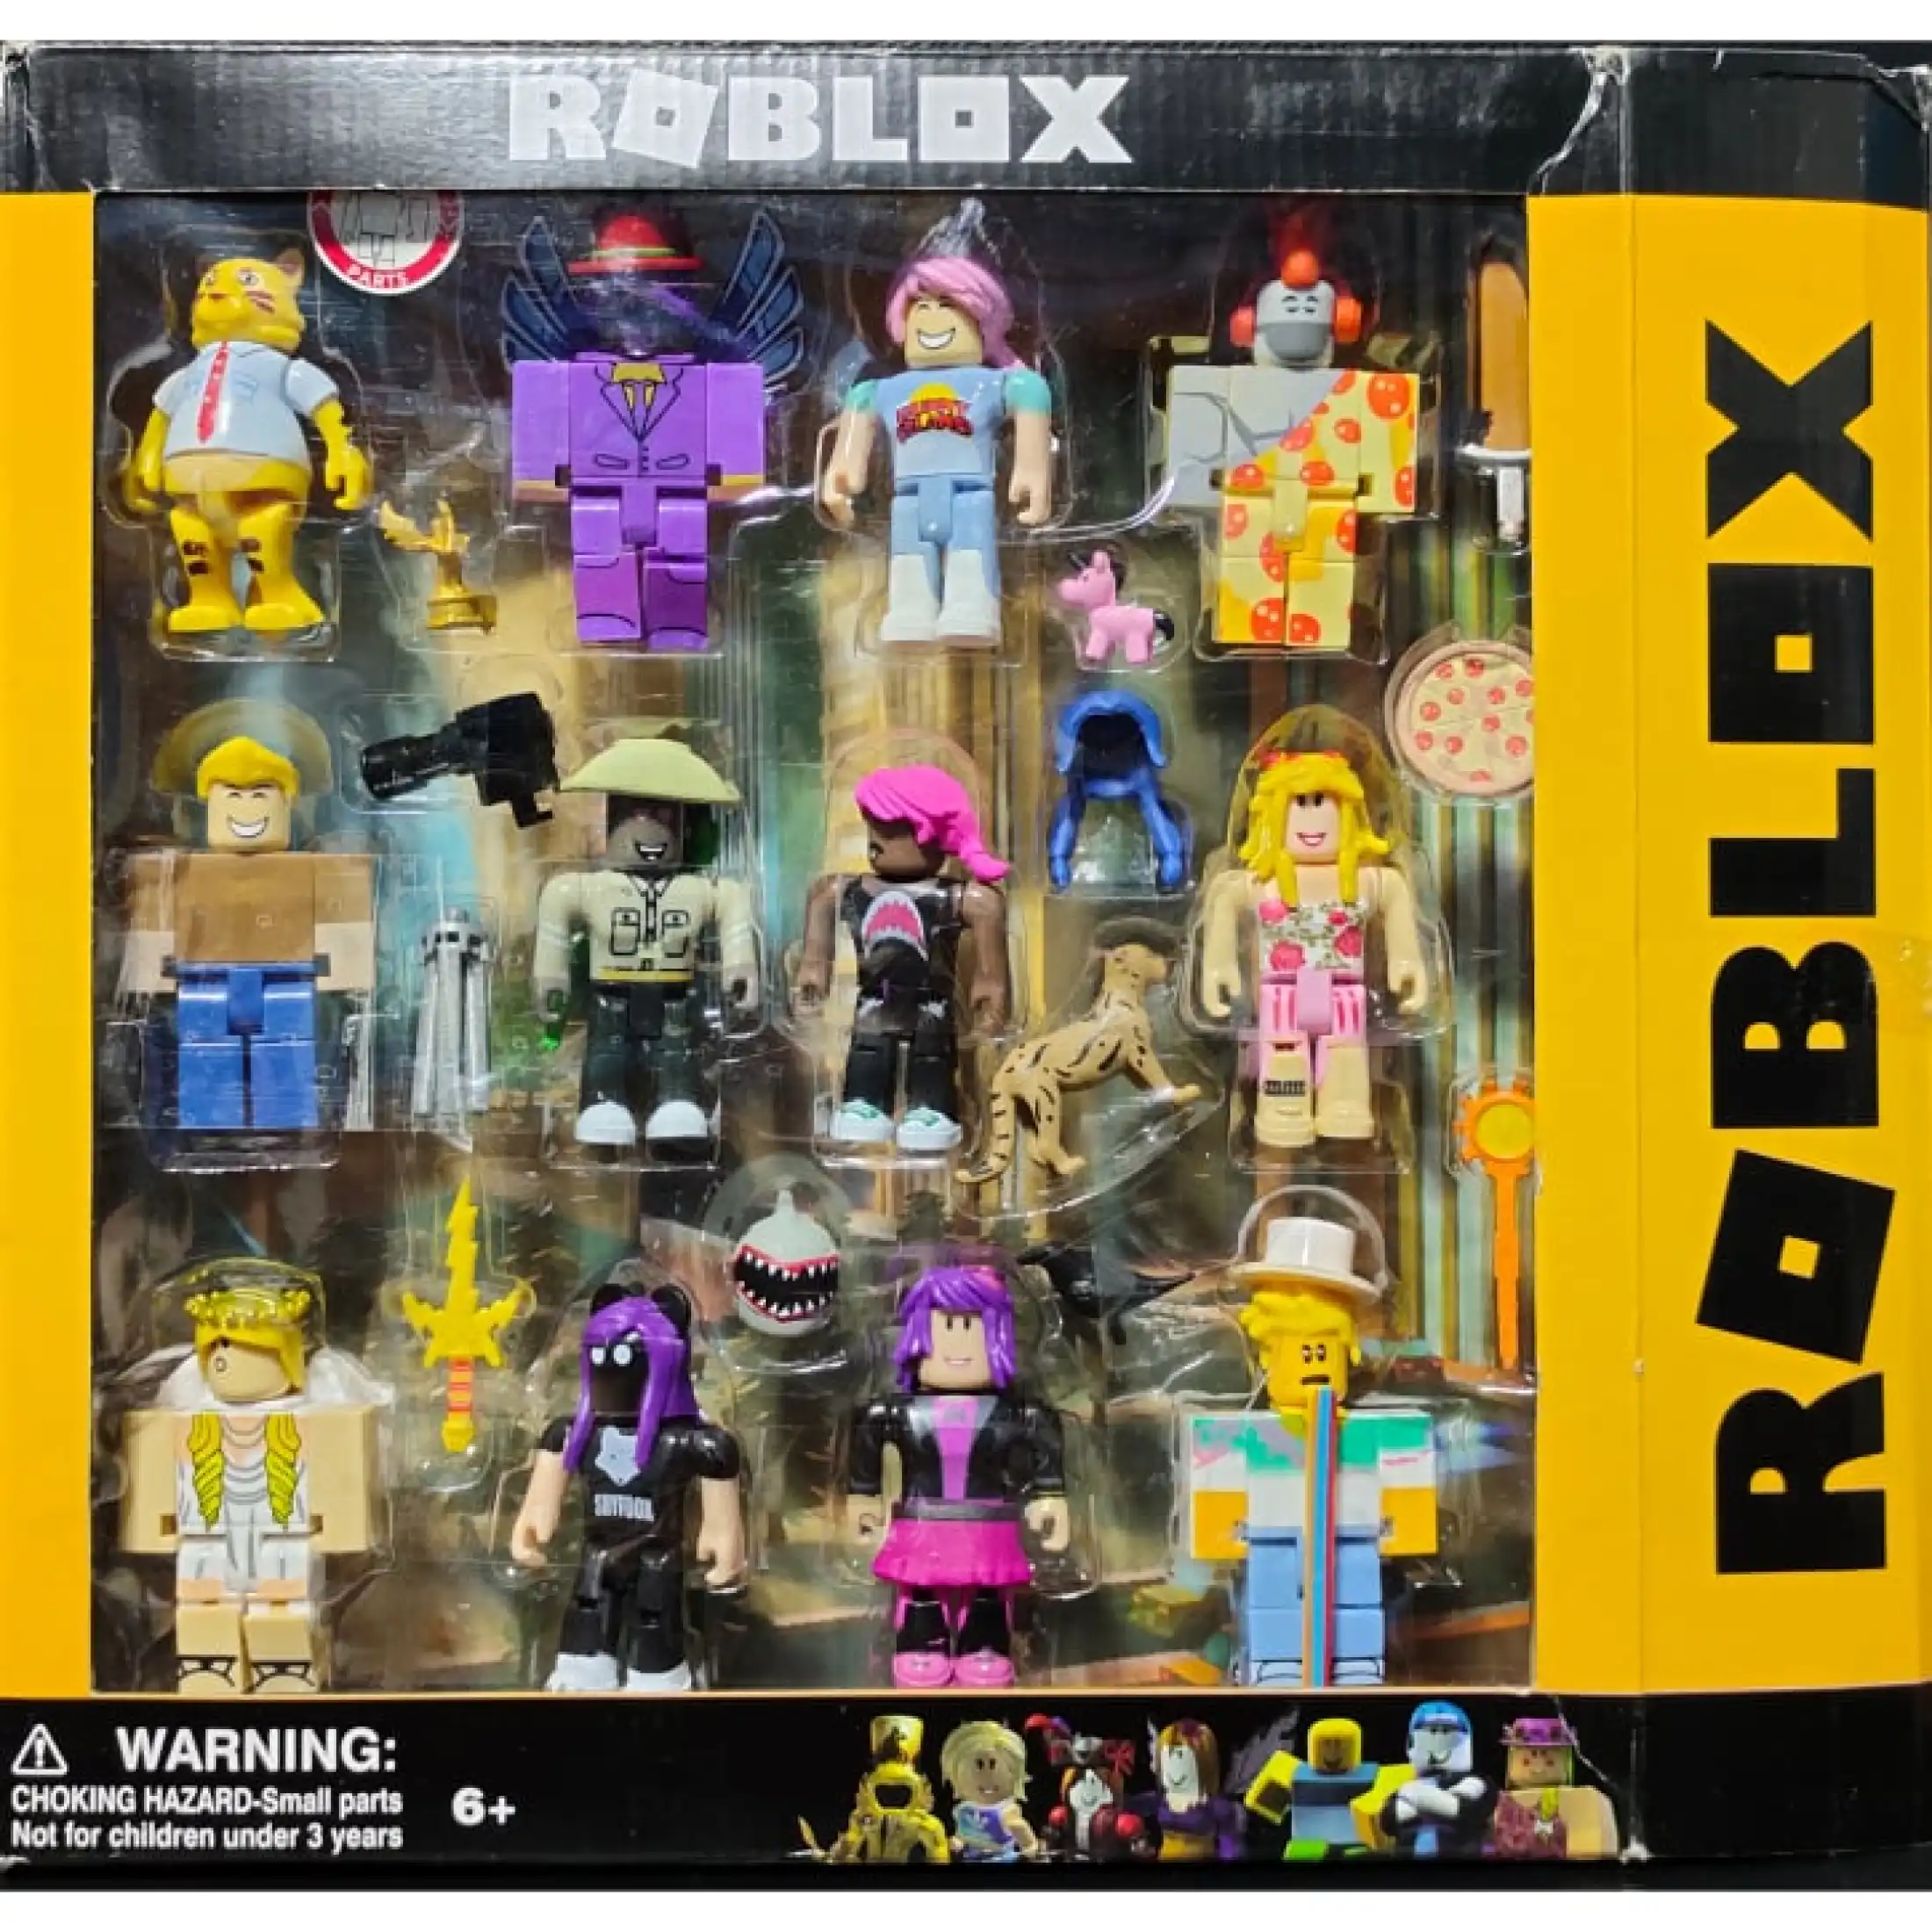 Roblox Celebrity Edition Series 2 3 Lazada Ph - roblox toys series 2 12 pack